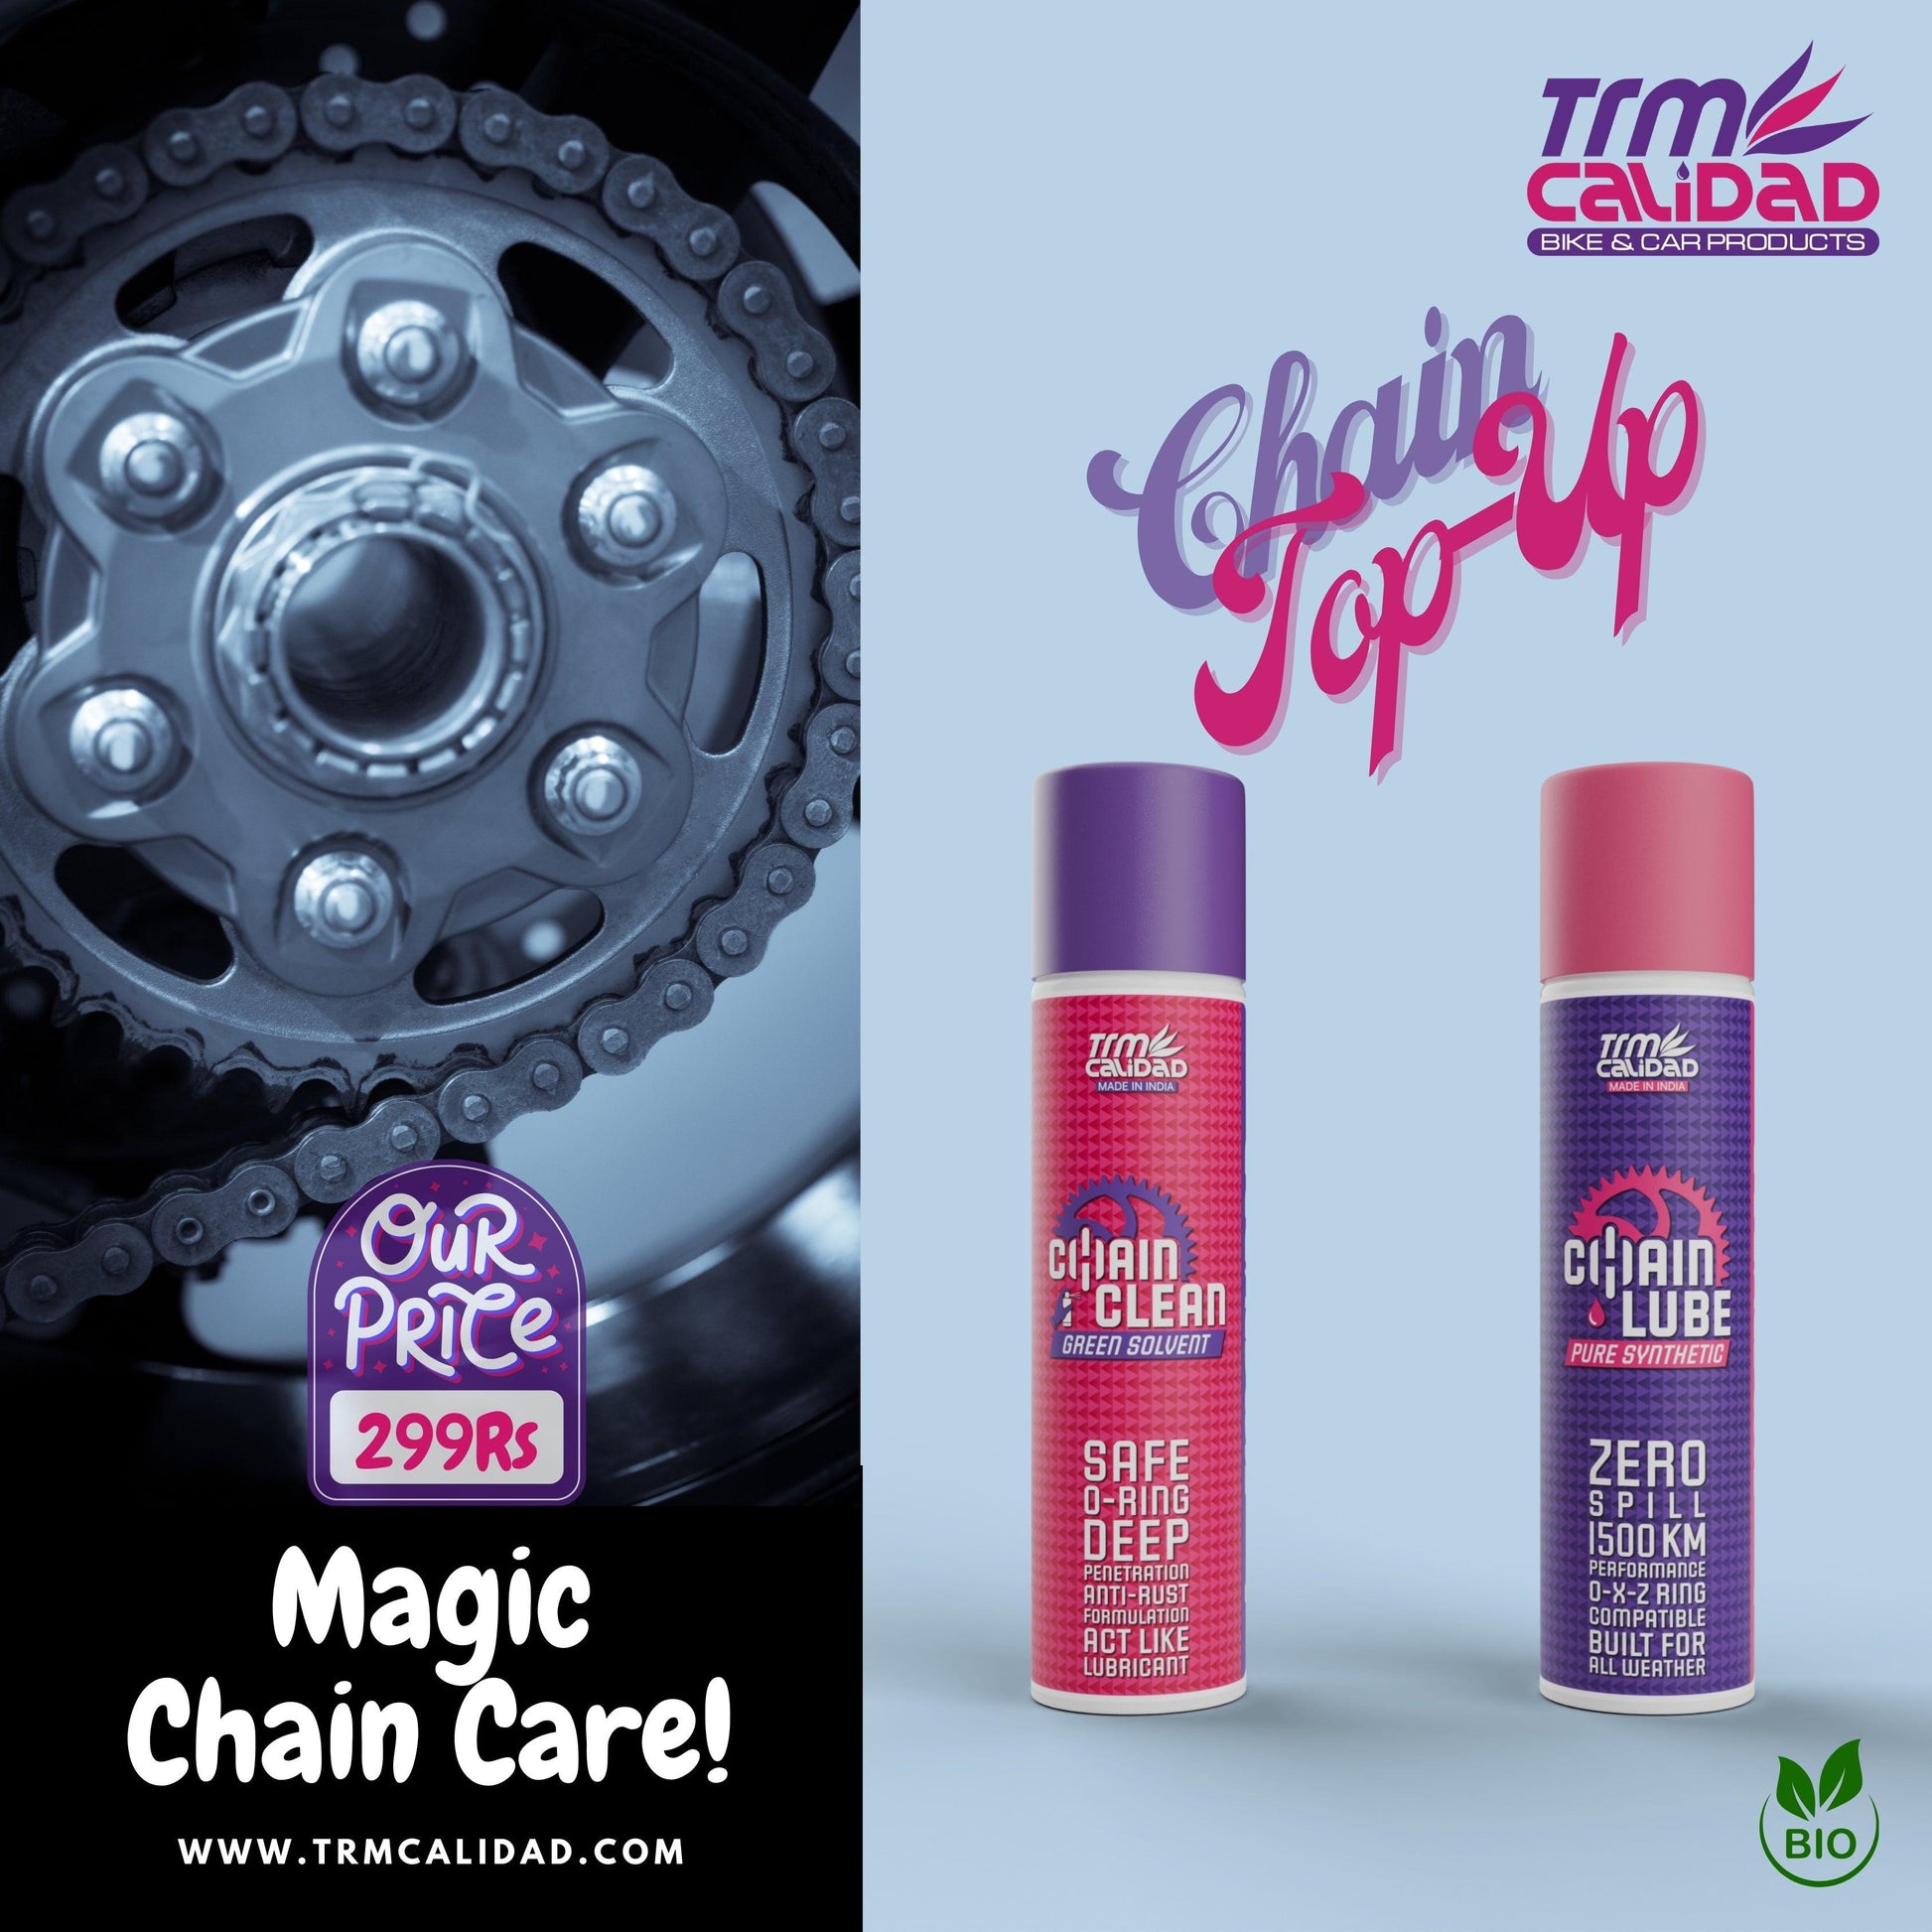 PURE SYNTHETIC CHAIN LUBE AND CLEANER COMBO (80ML+80ML) - Trmcalidad India